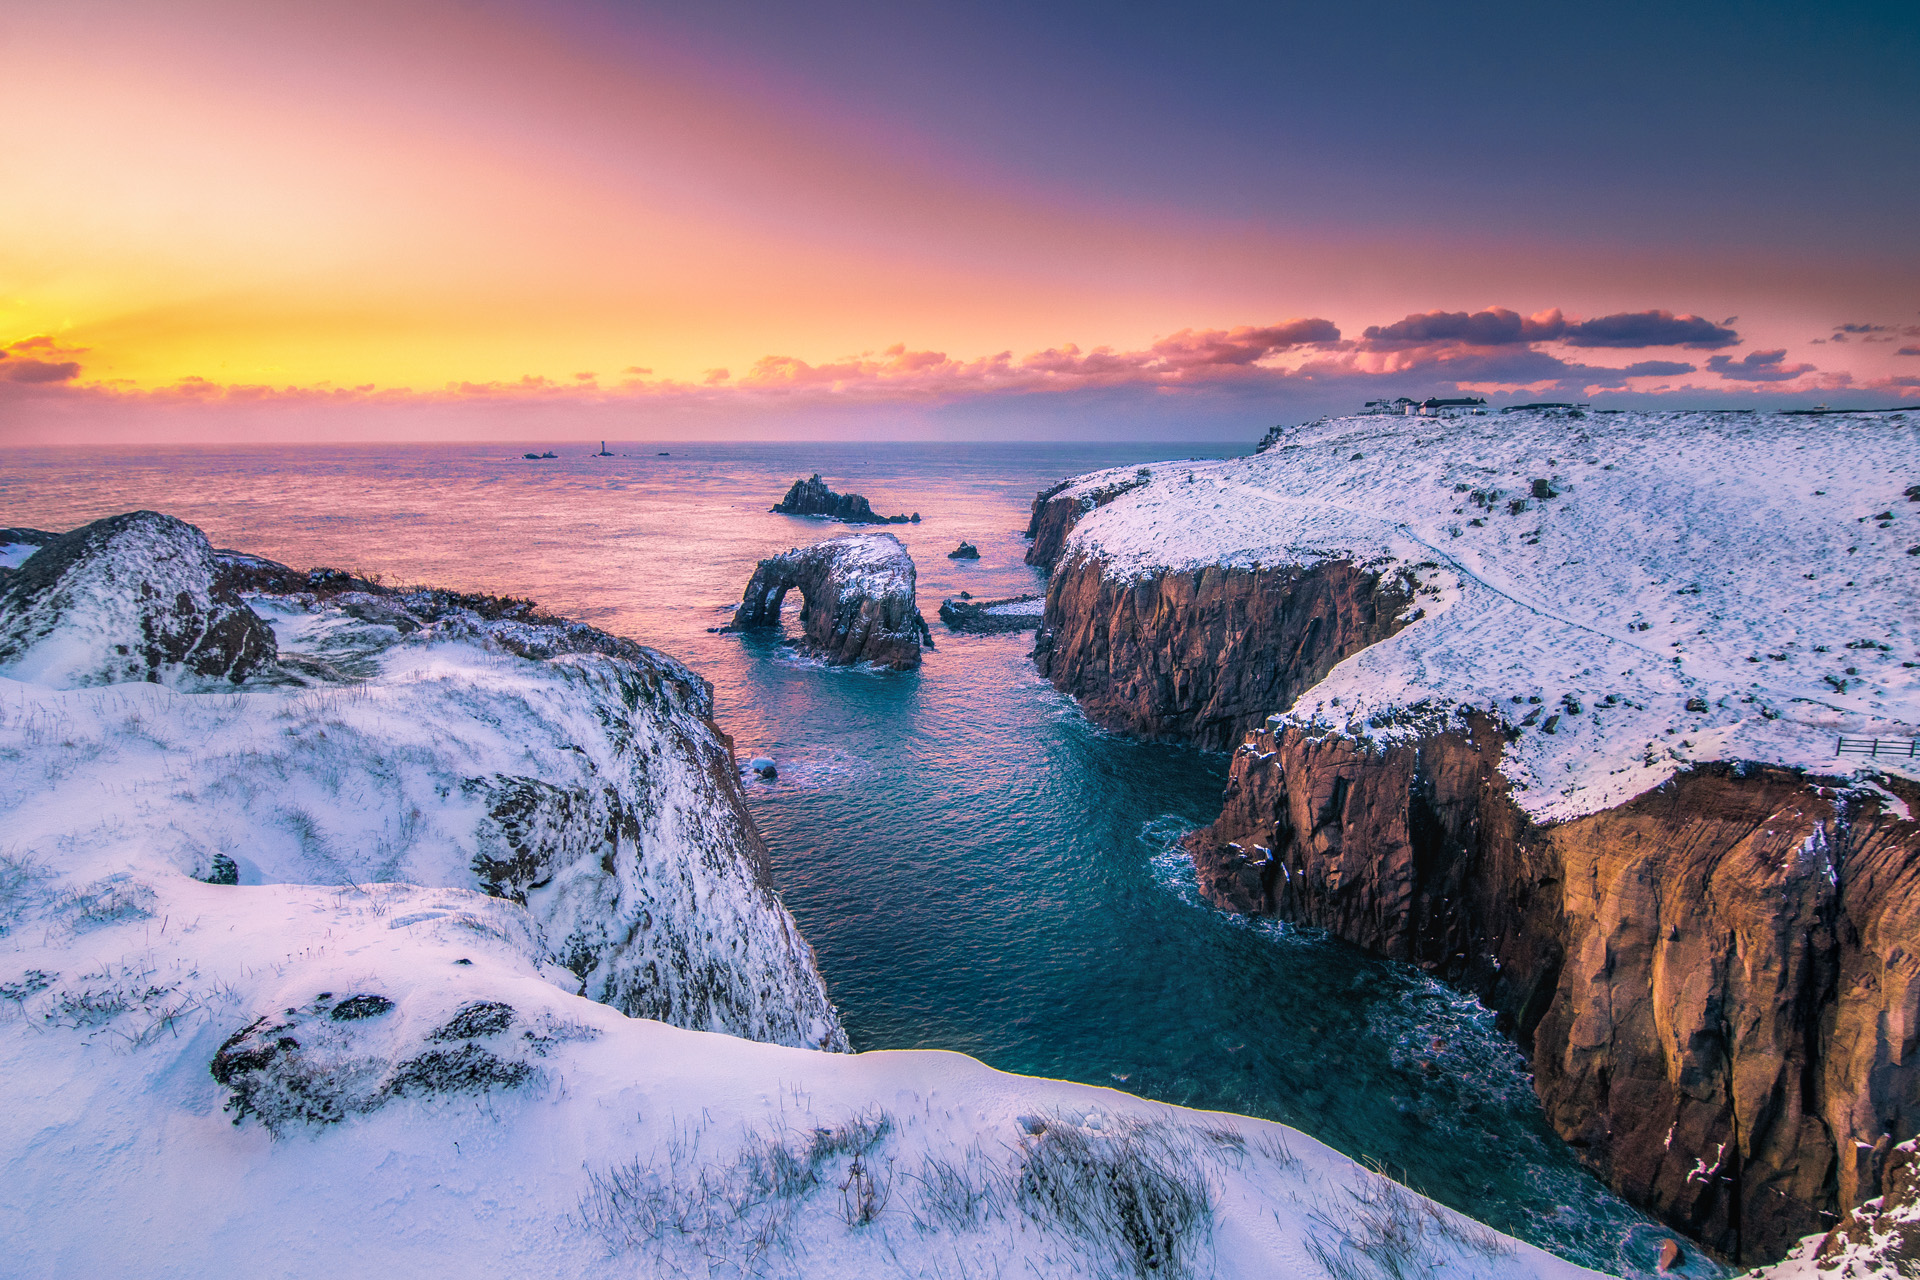 The Cornish Coast Path covered in snow is definitely not an everyday sight and not one that I'm about to forget... Taken back in 2018 this was one of the most incredible nature spectacles that I have ever witnessed.